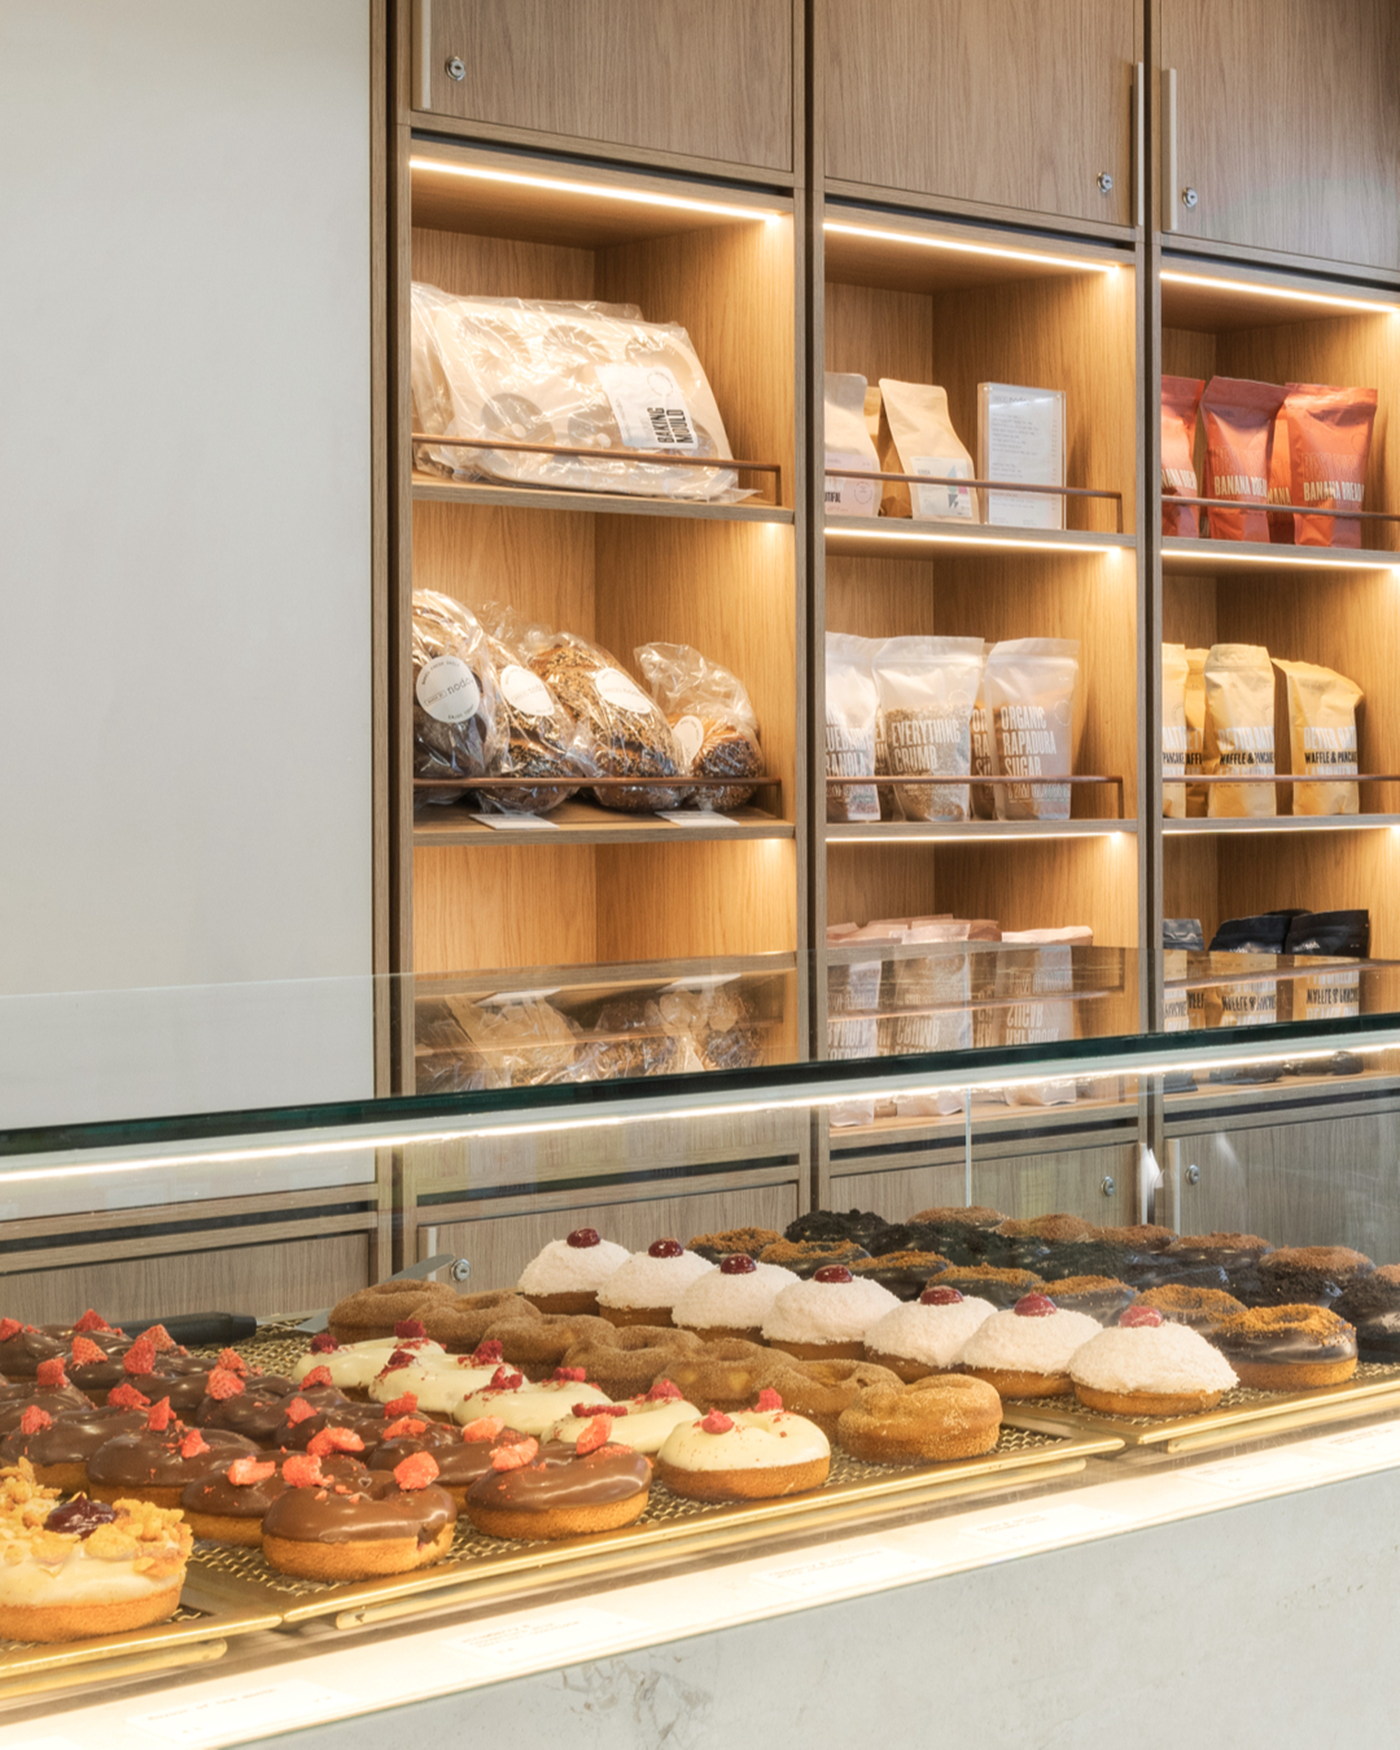 Counter filled with donuts and shelves in the background with bread and packets at Nodo Donuts Brisbane 